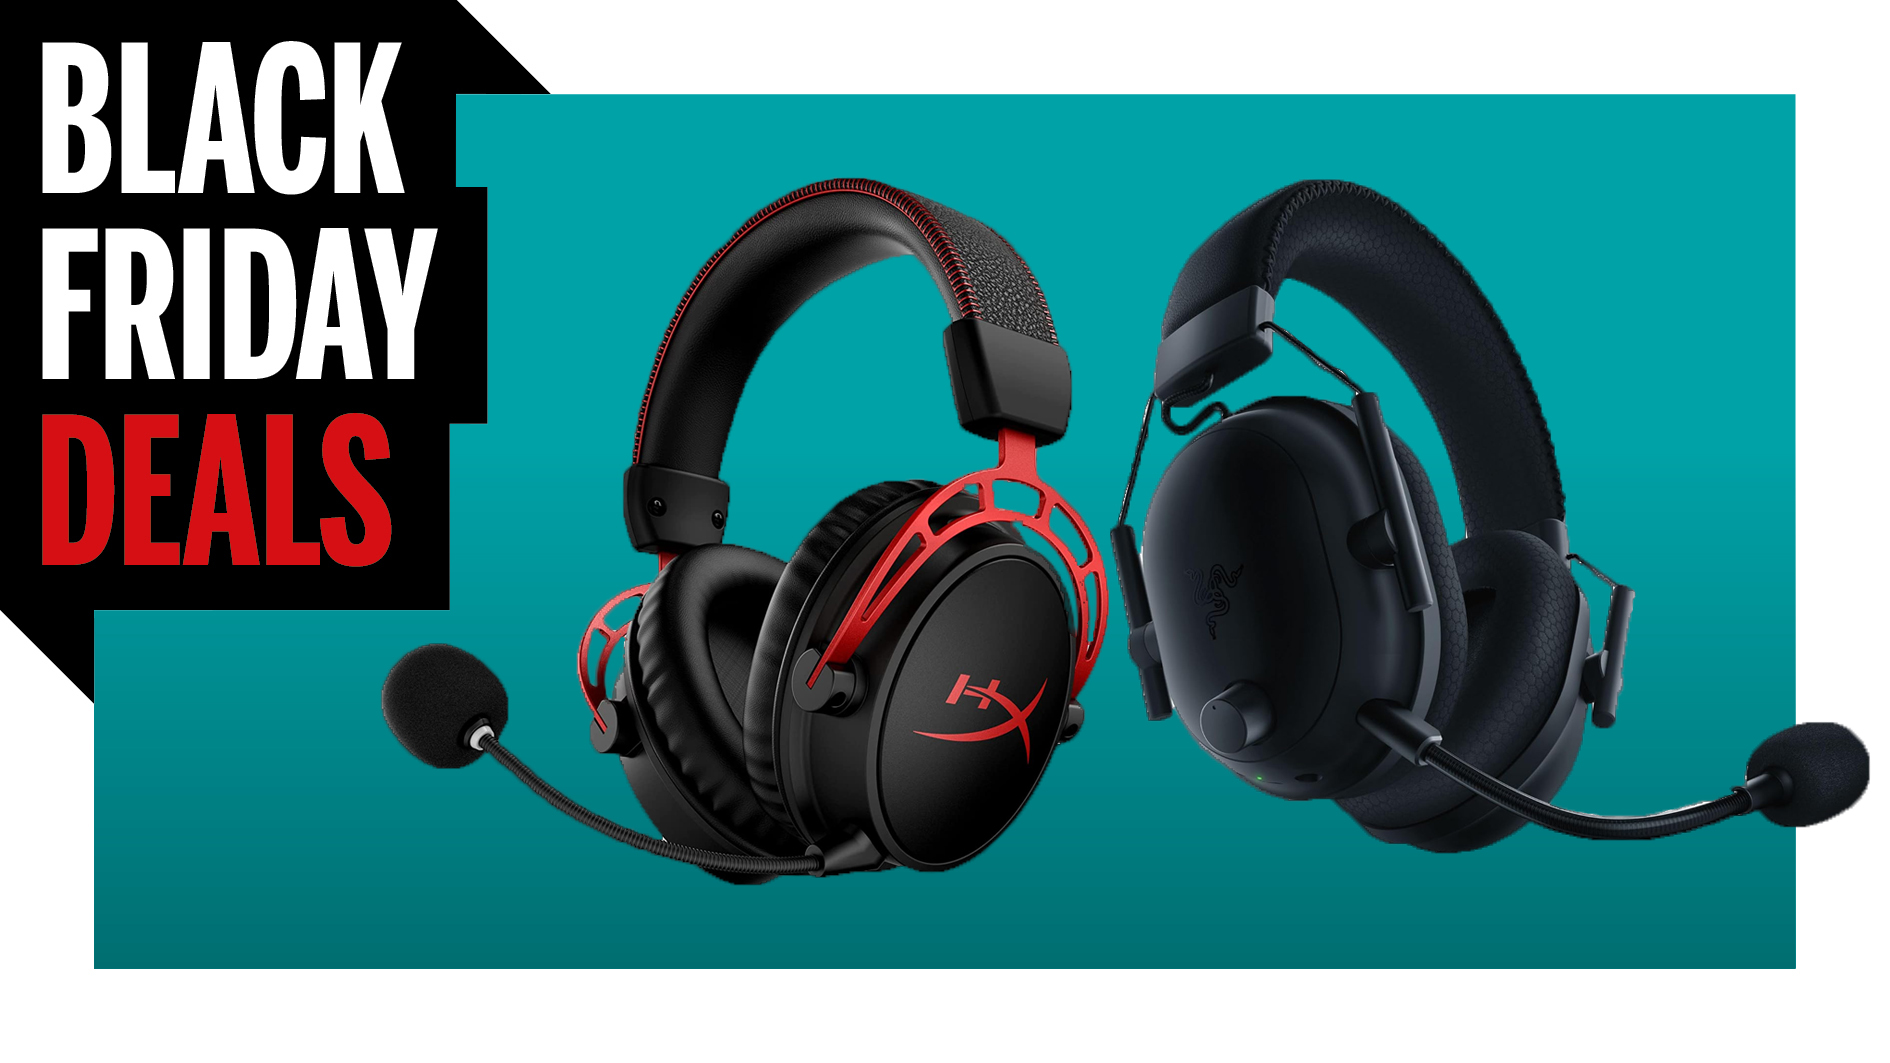 Hyperx Cloud Flight Wireless Gaming Headset For Playstation 4/5 : Target